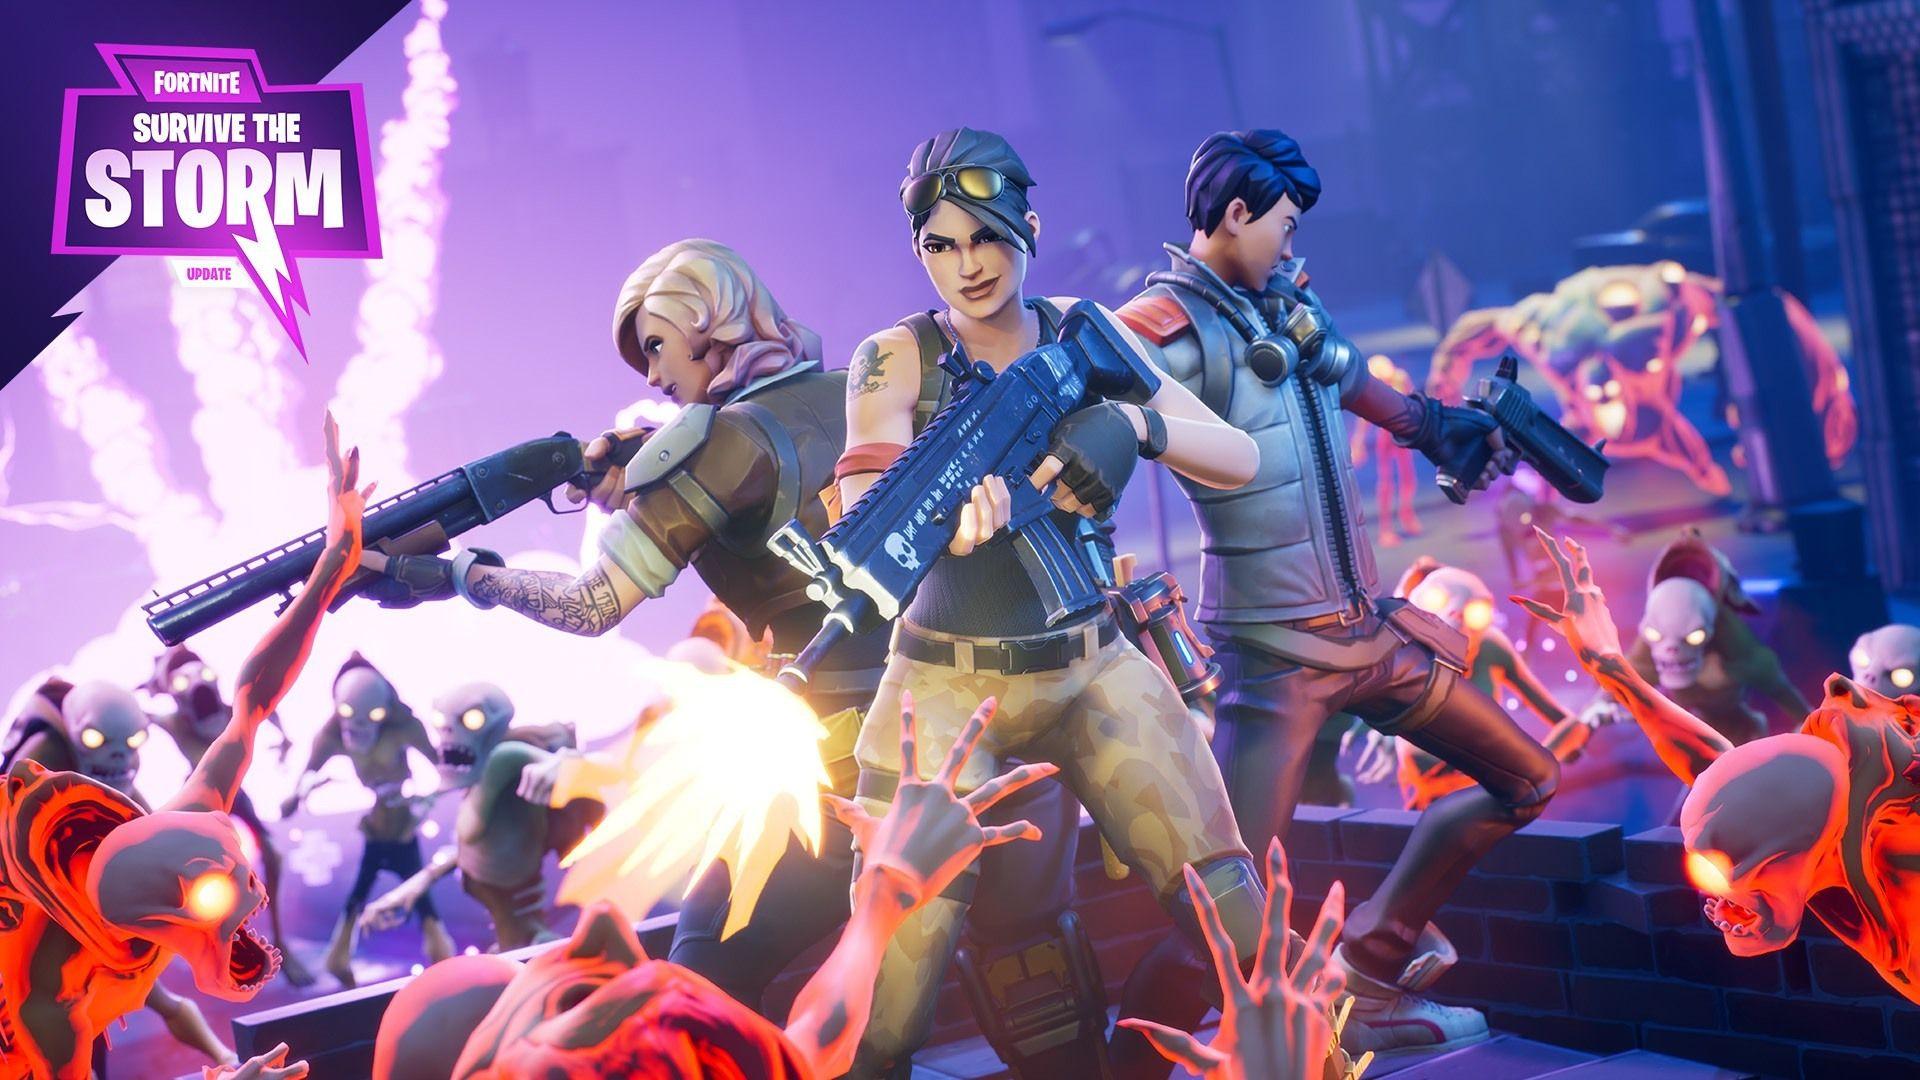 Fortnite 'Survive the Storm' Official Video